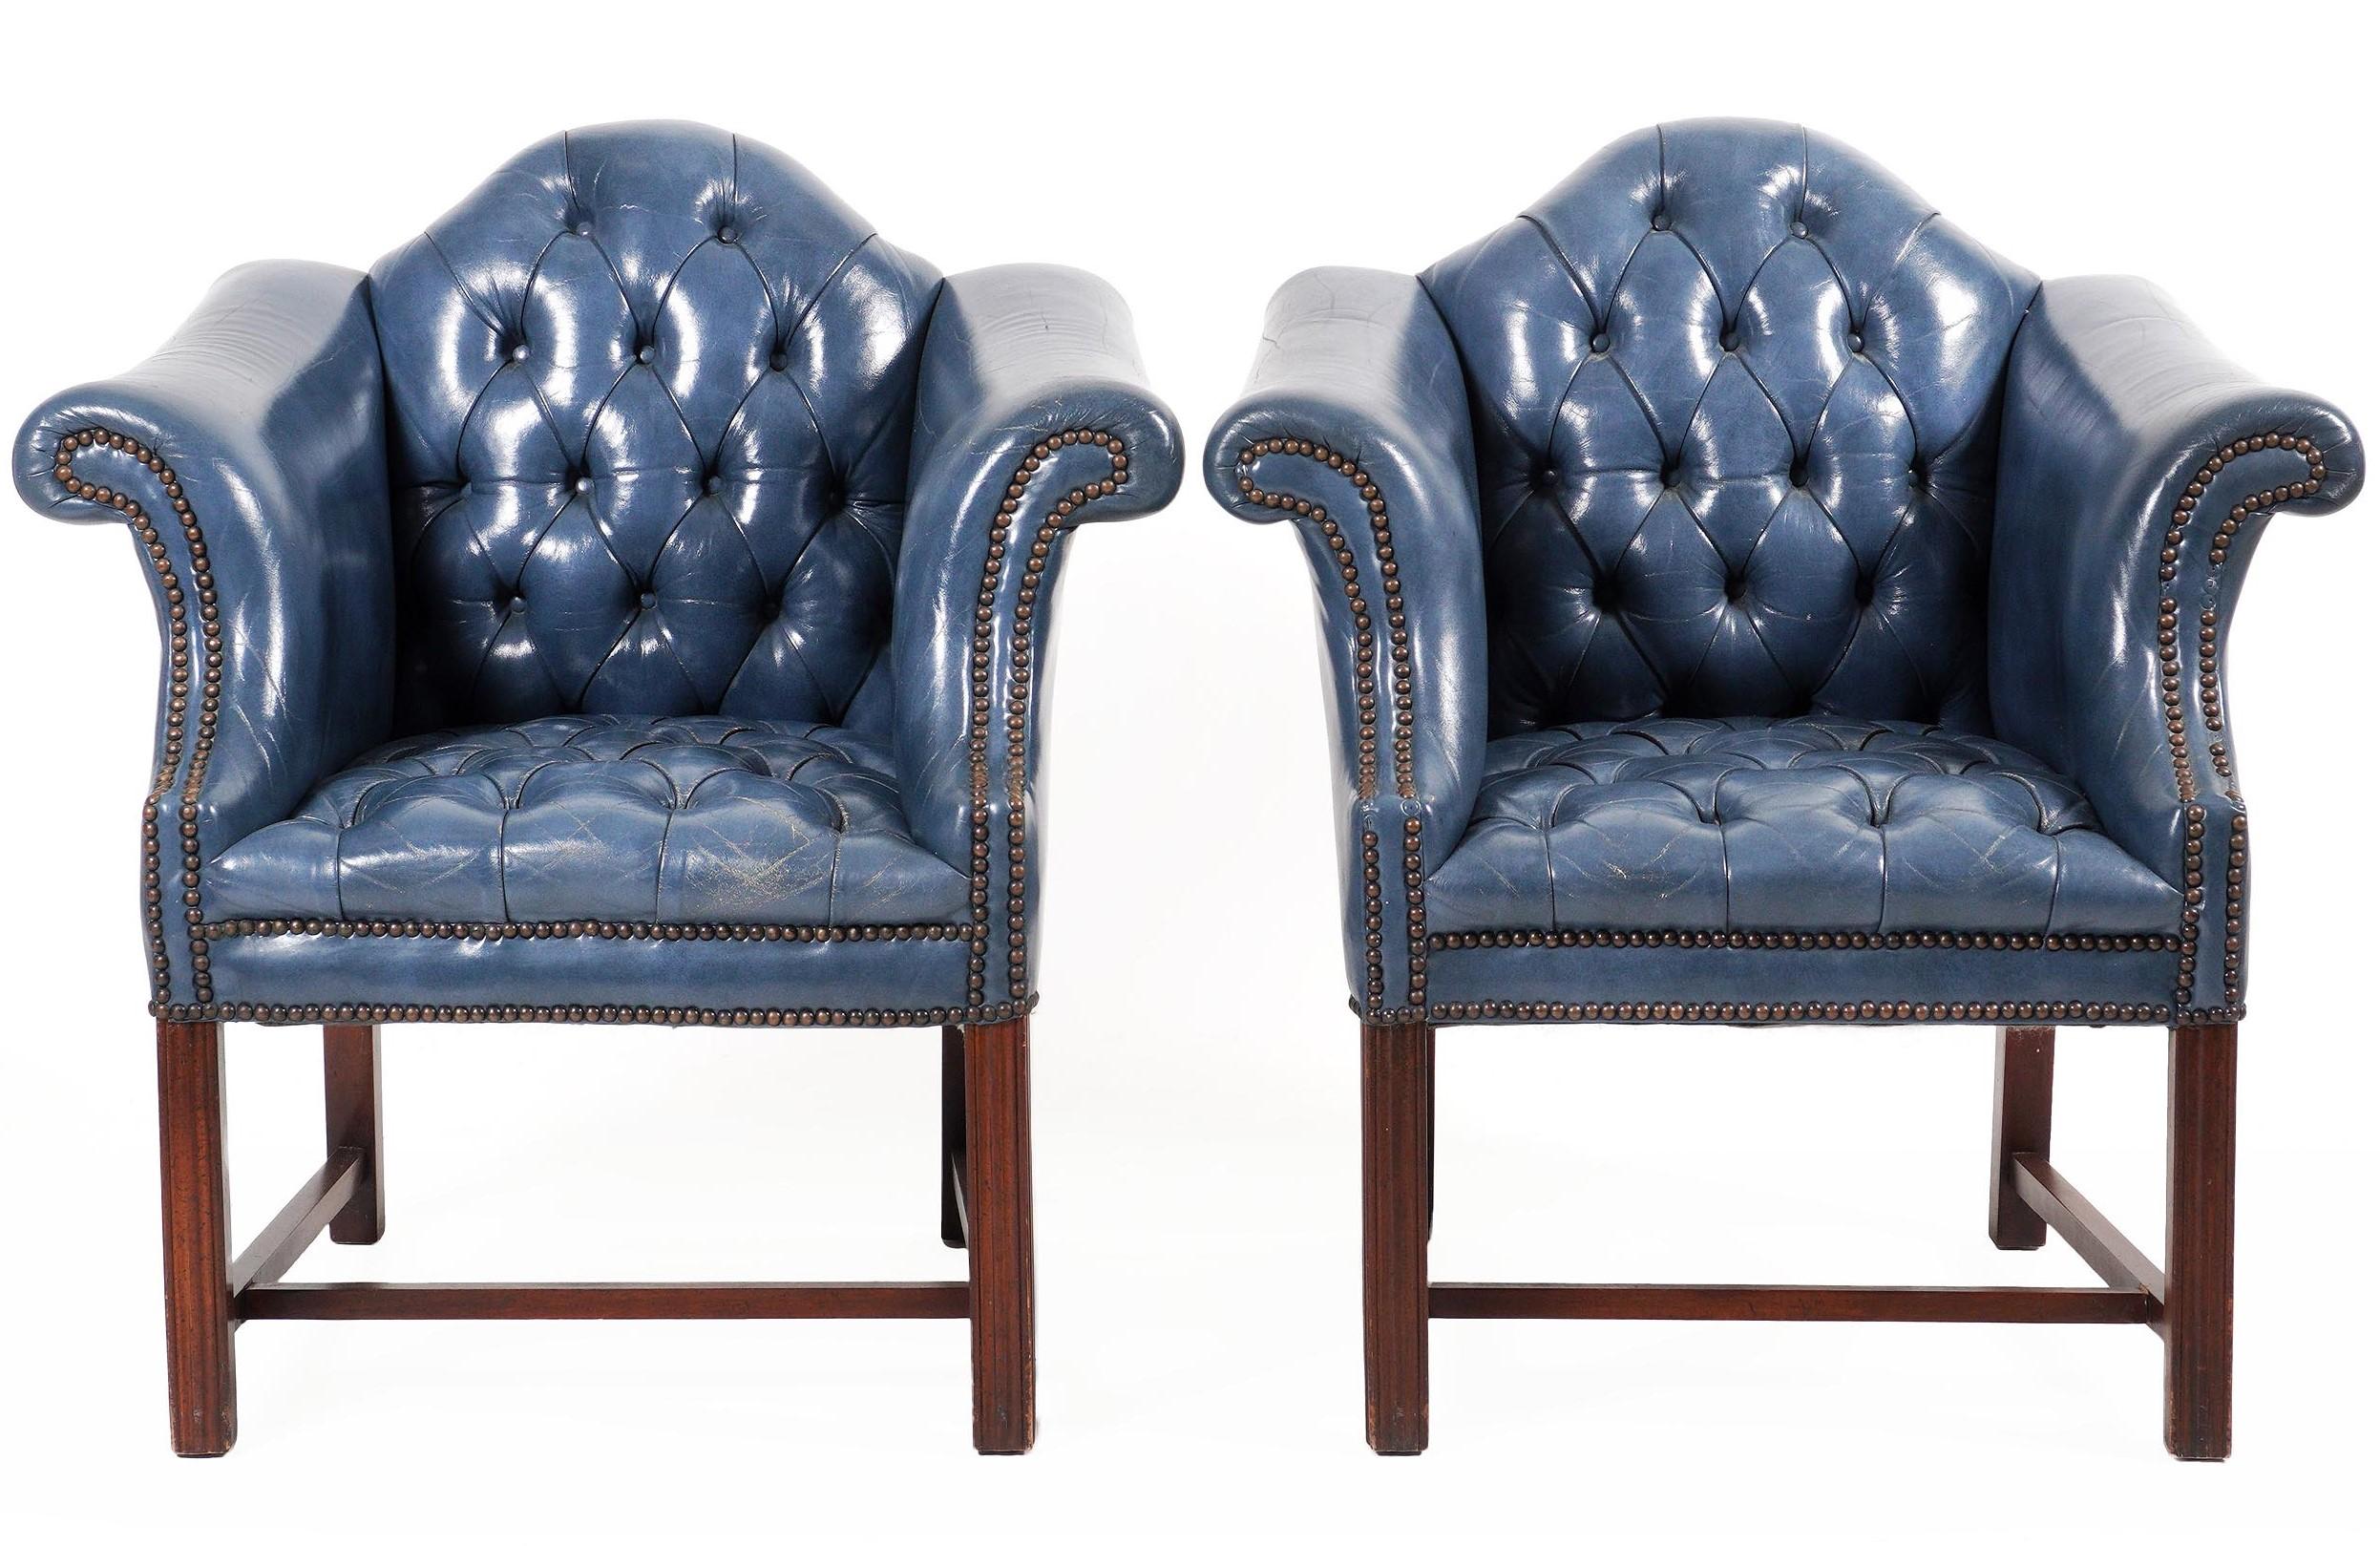 Pair of English blue leather wing back Chesterfield chairs, each one with tufted and nail head detail, custom blue leather upholstery raised on four mahogany Marlborough legs, with 'H' stretcher. Clean and simple lines great patina, some minor signs